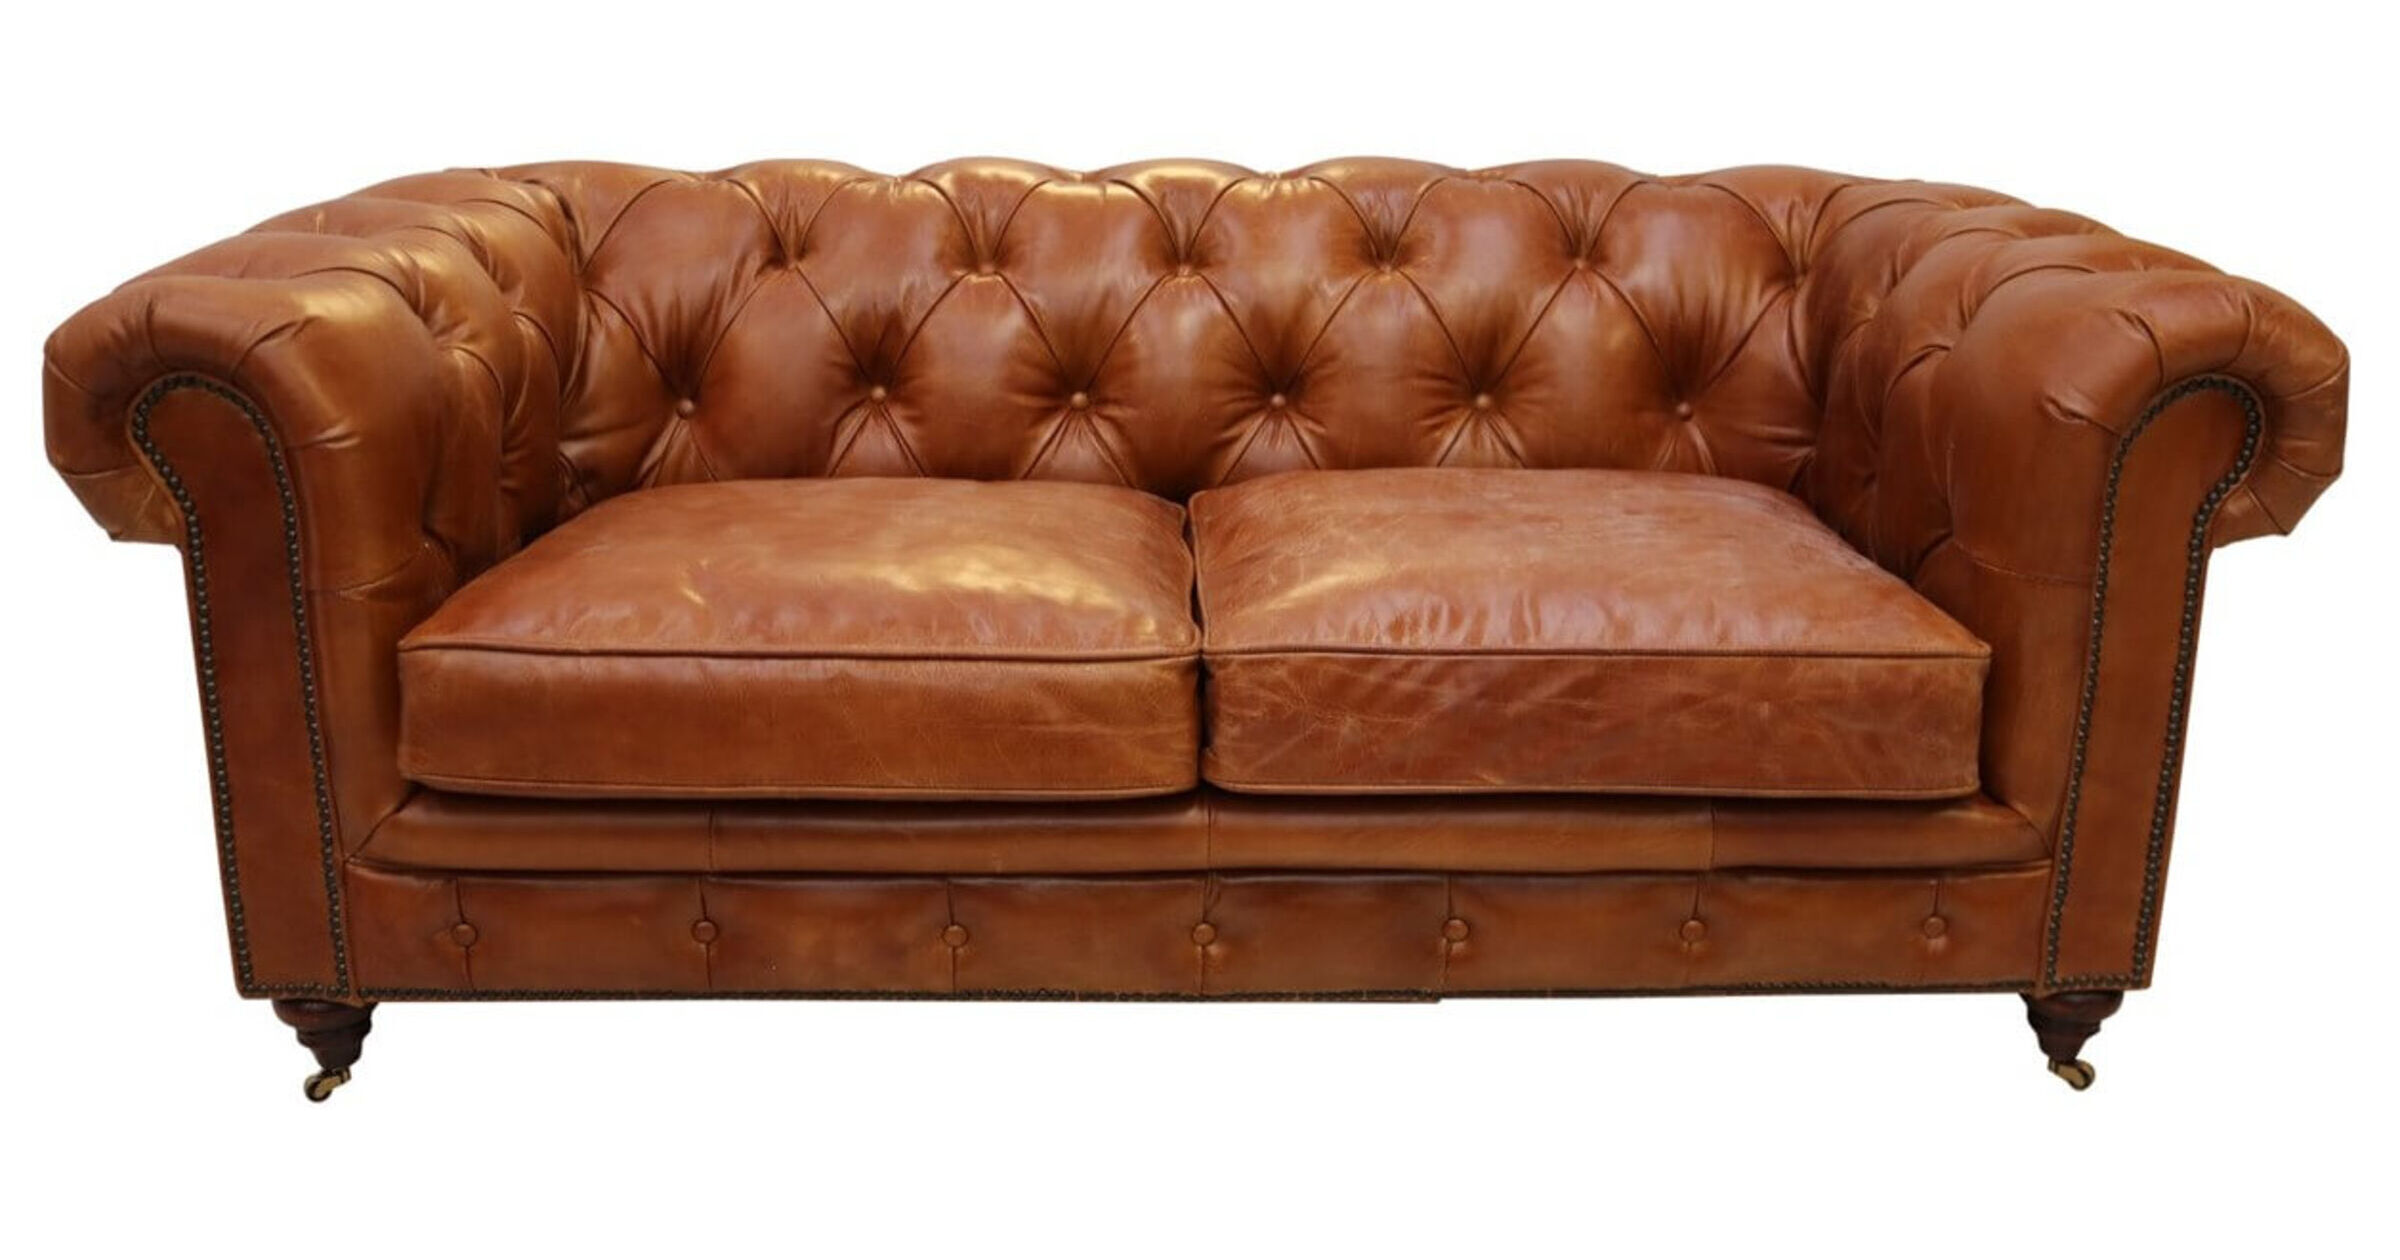 tan leather chesterfield sofa bed